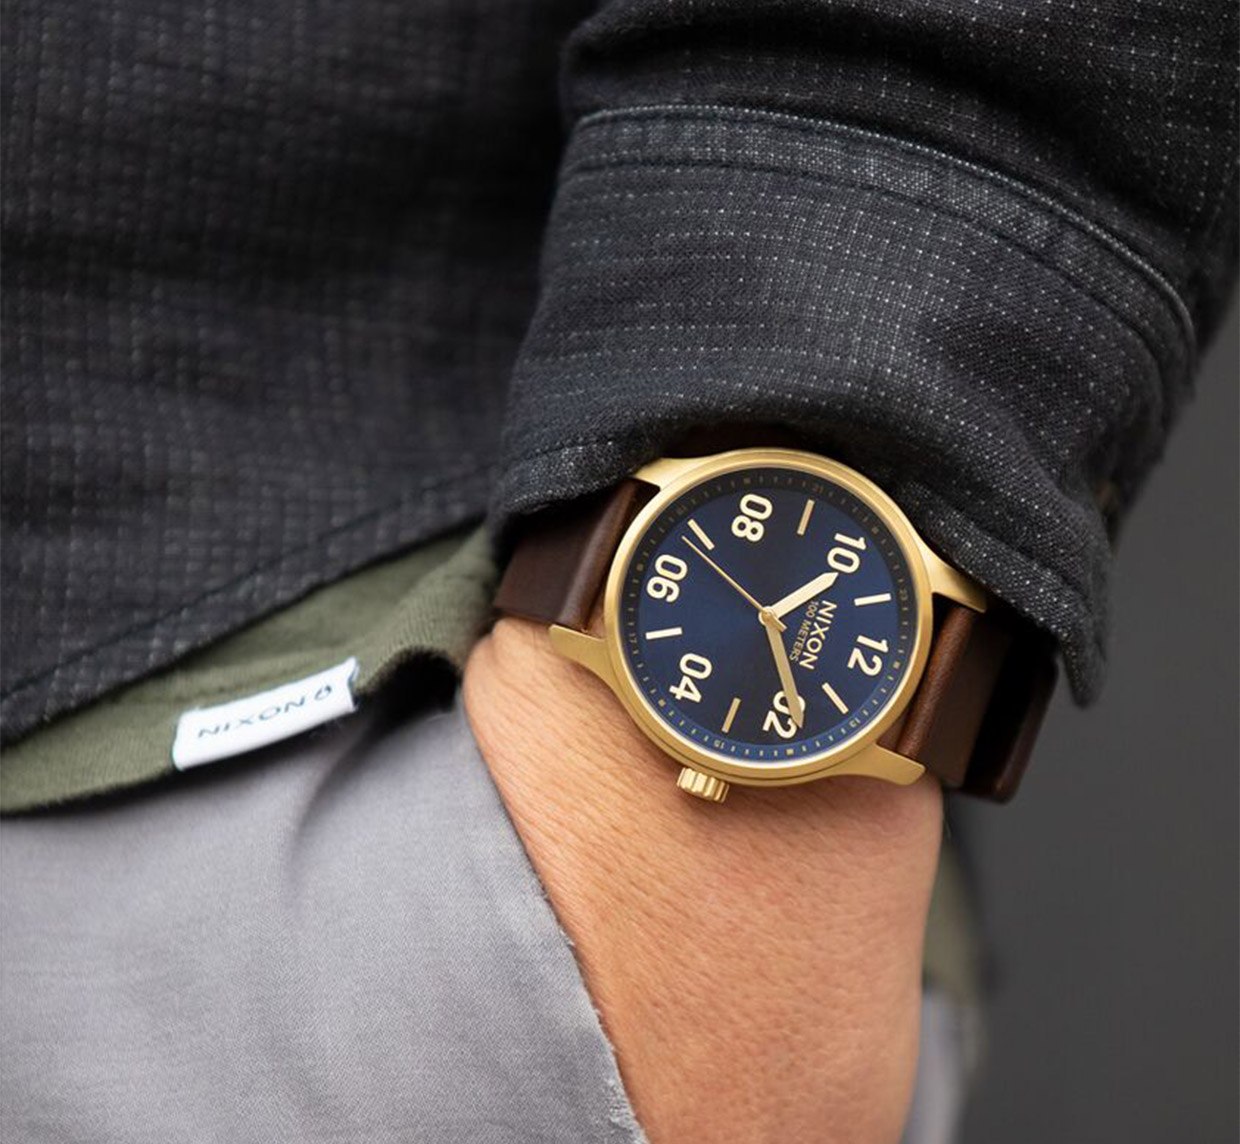 Nixon Patrol Watches are Bold and Easy to Read